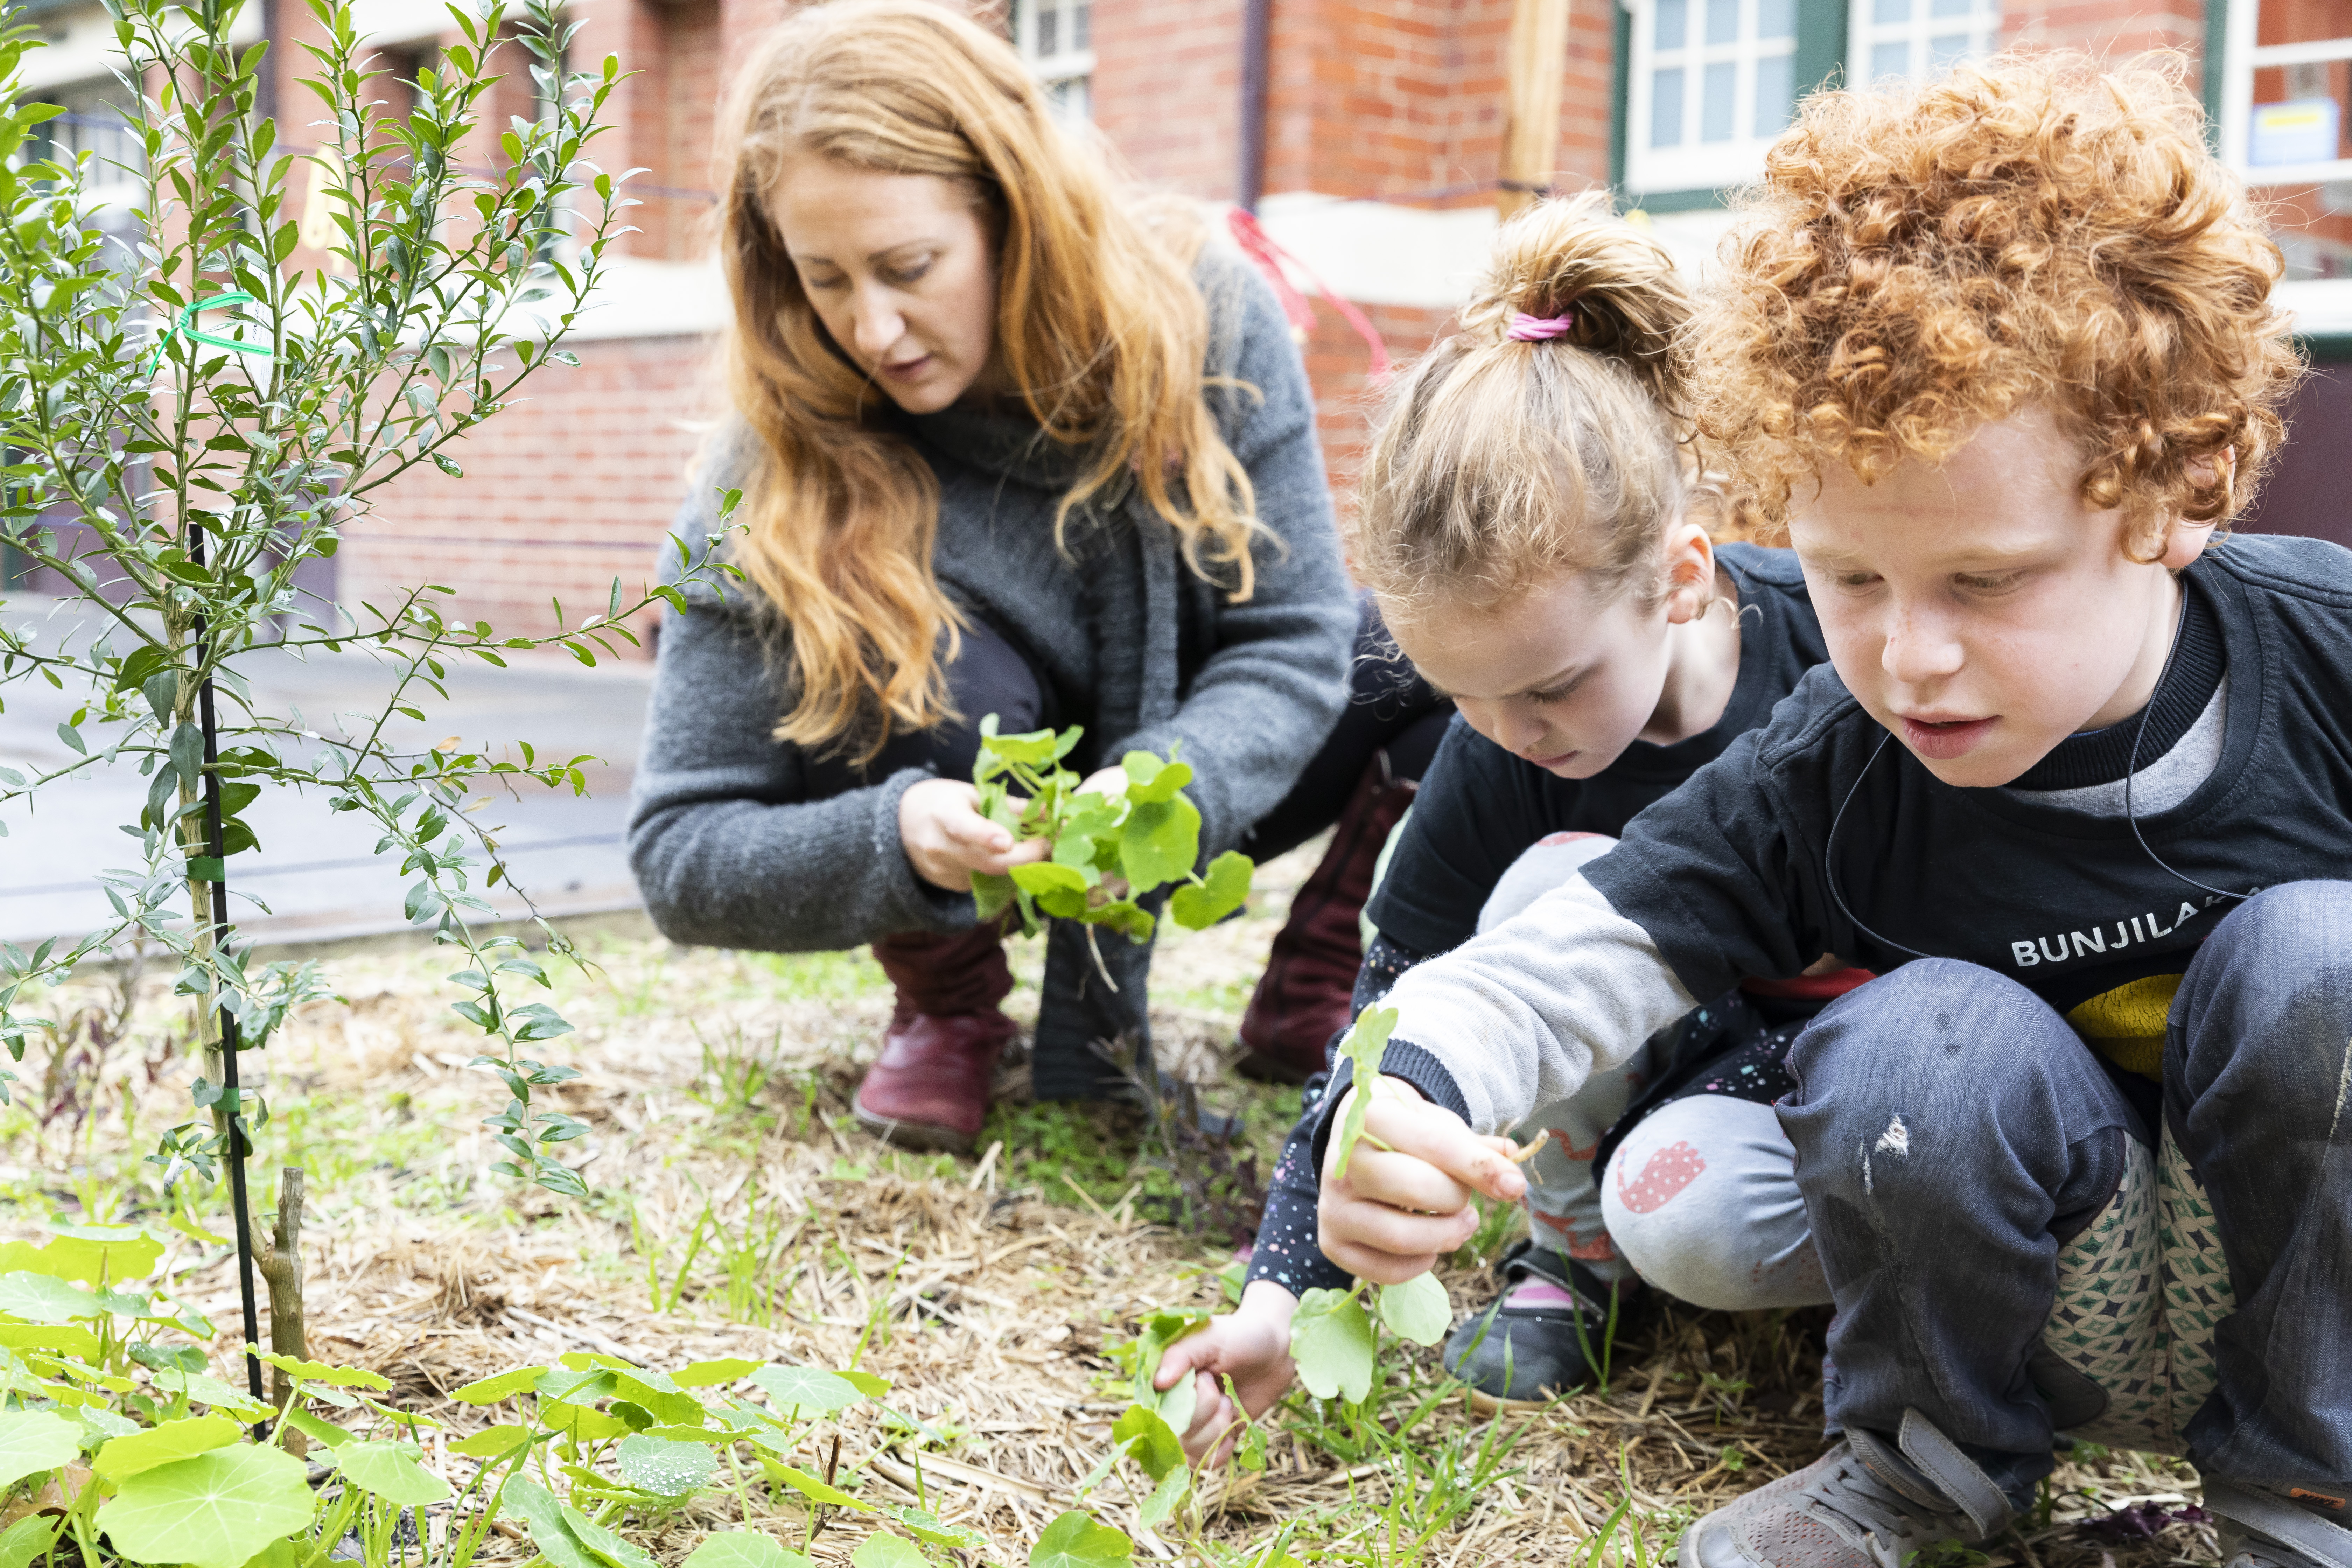 An adult and two children planting plants in garden